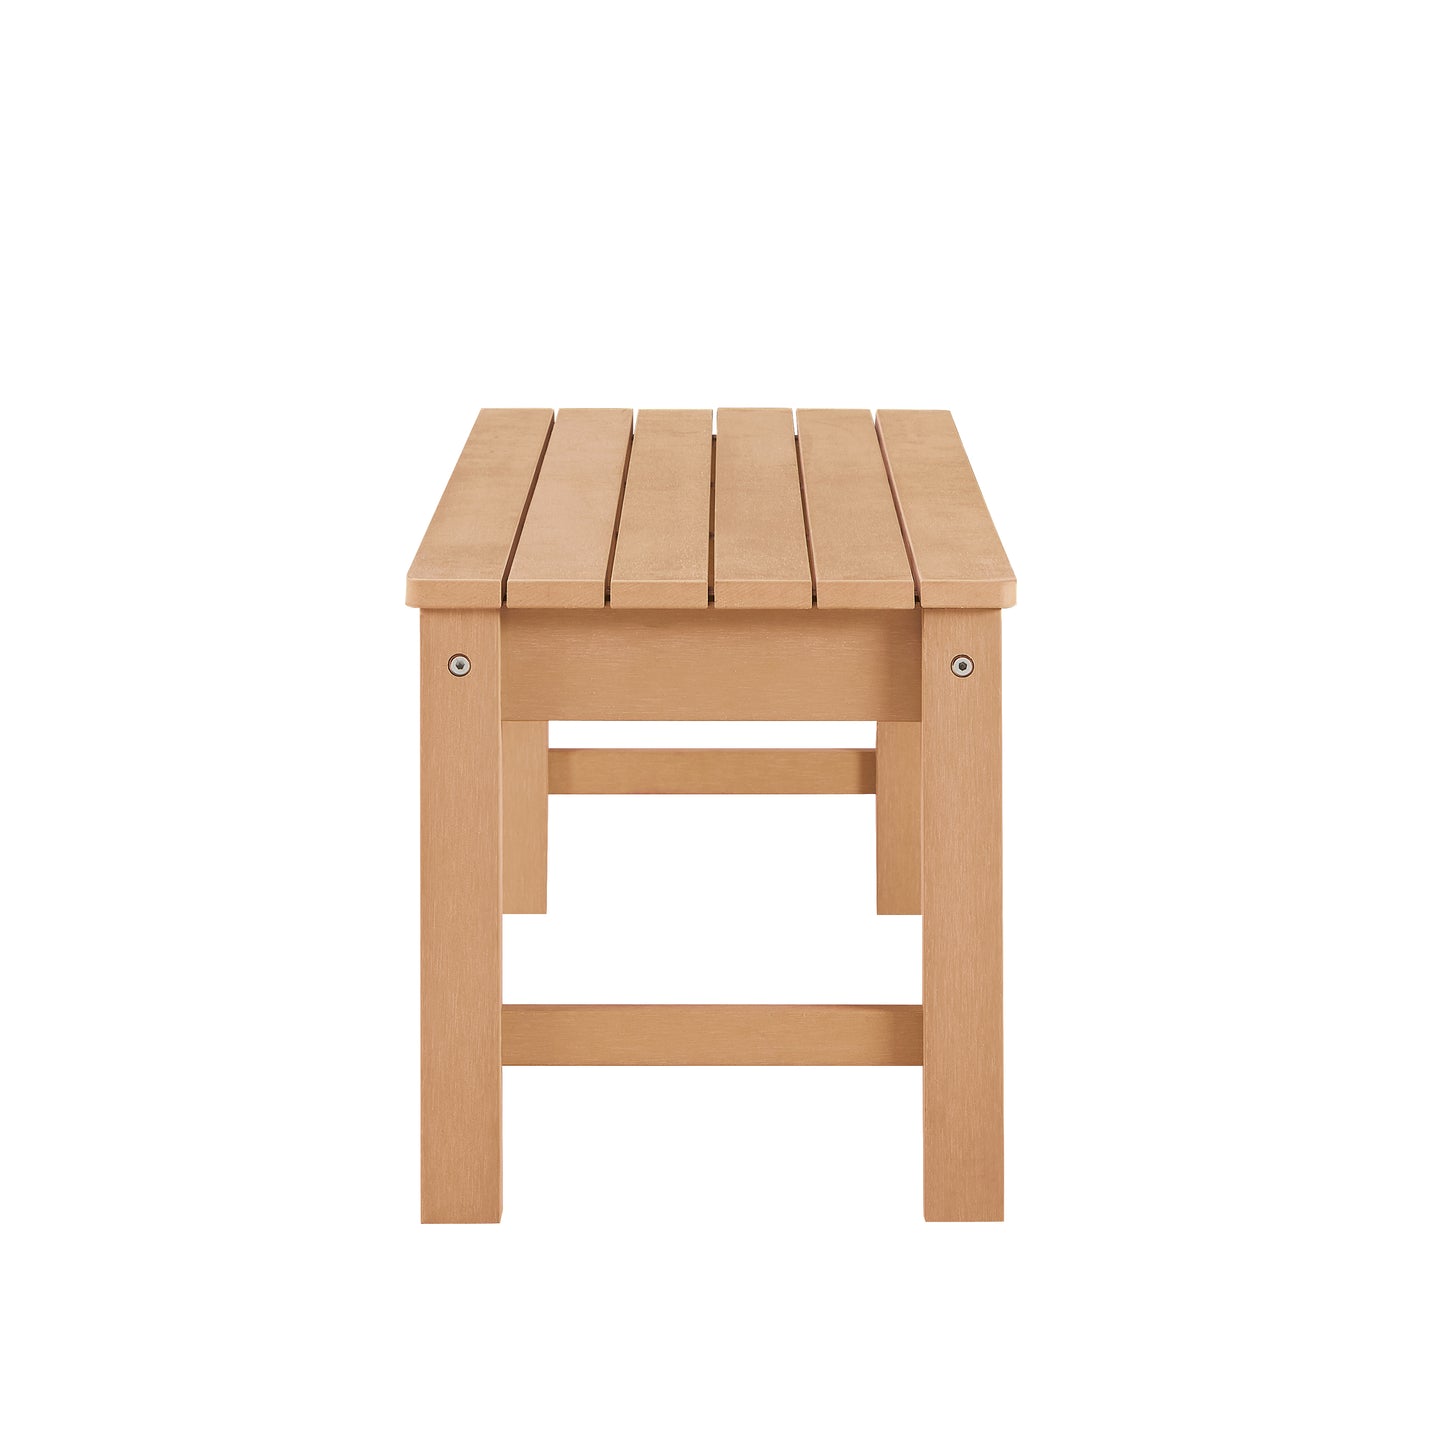 Winawood Backless 2 Seater Wood Effect Bench - New Teak